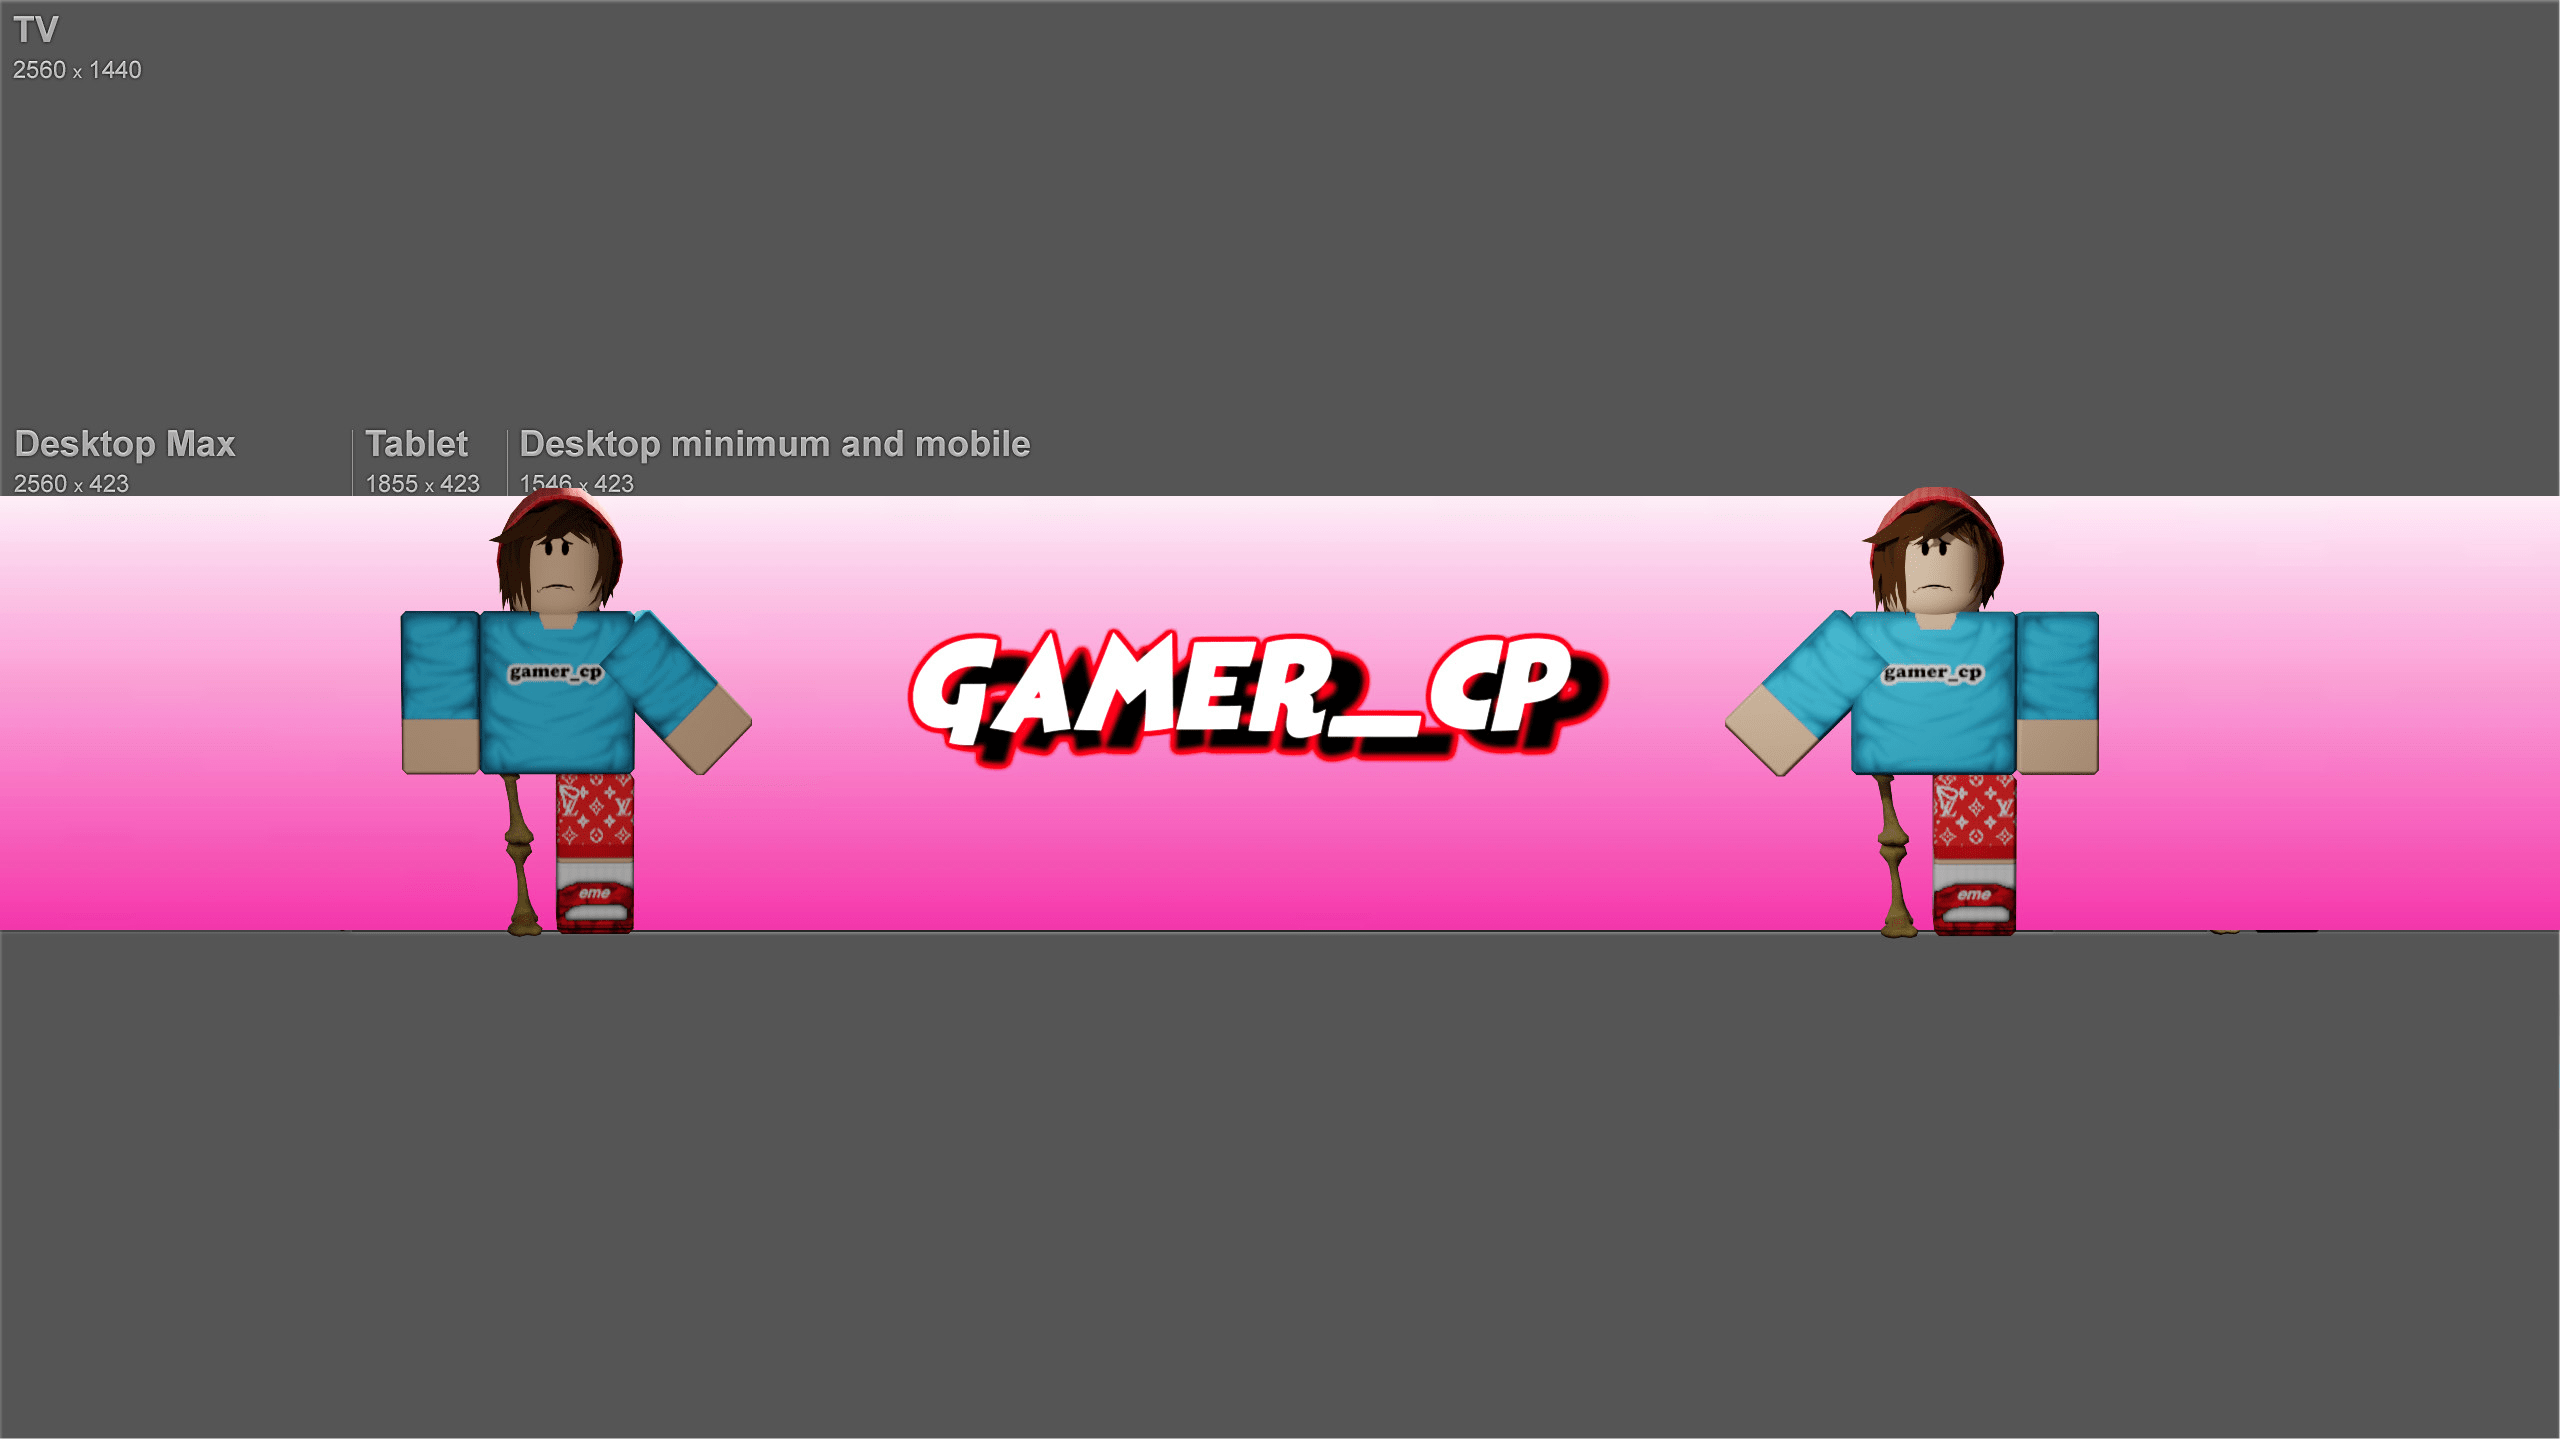 Roblox Banners And Thumbnail By Gamer Cp Fiverr - imagen de banner roblox